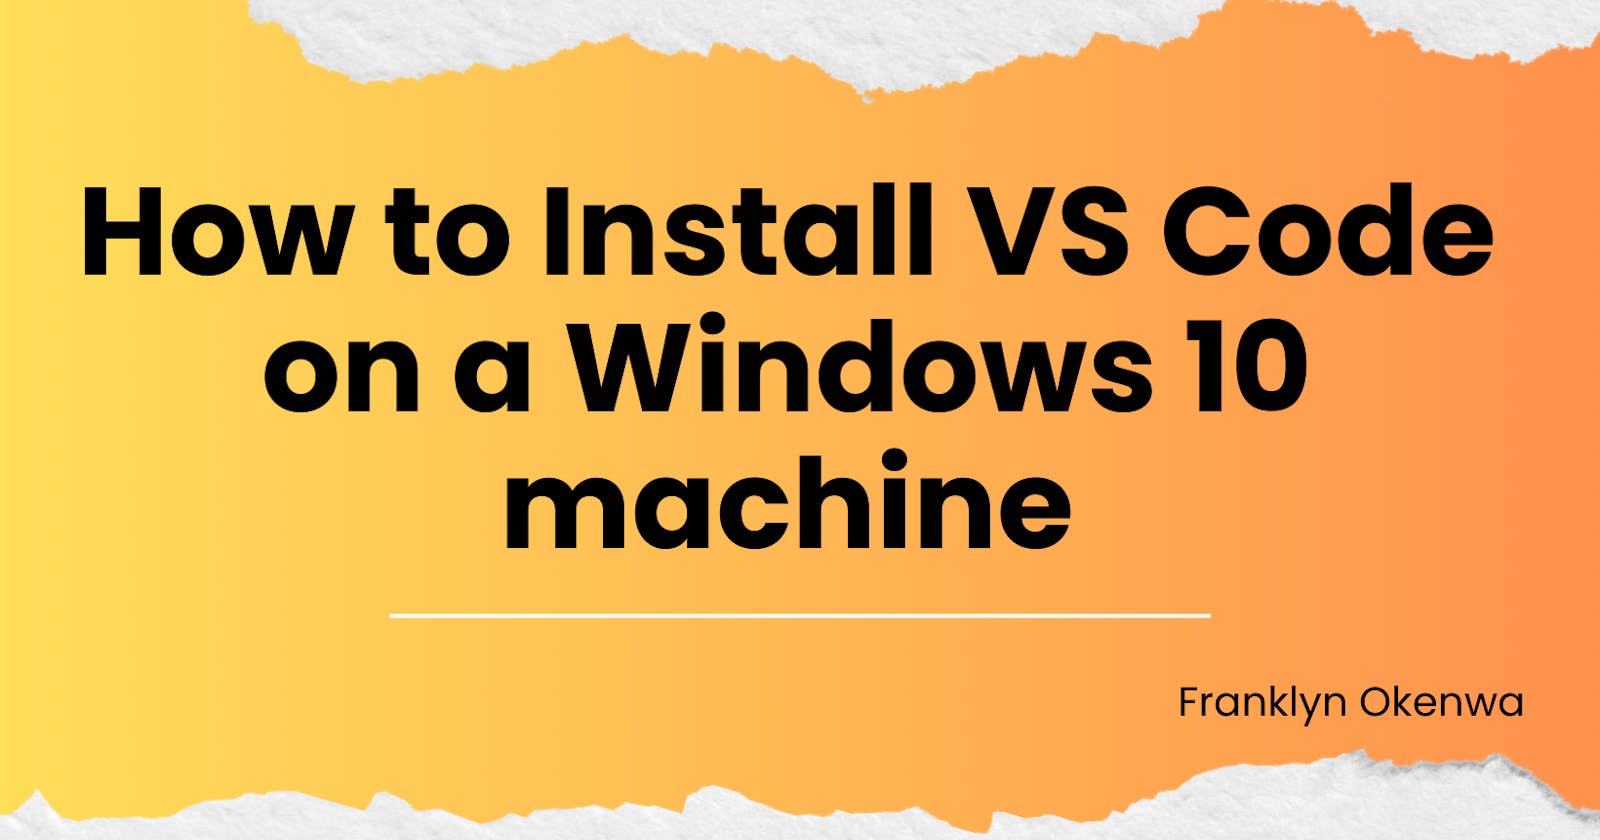 How to Install VS Code on a Windows 10 machine